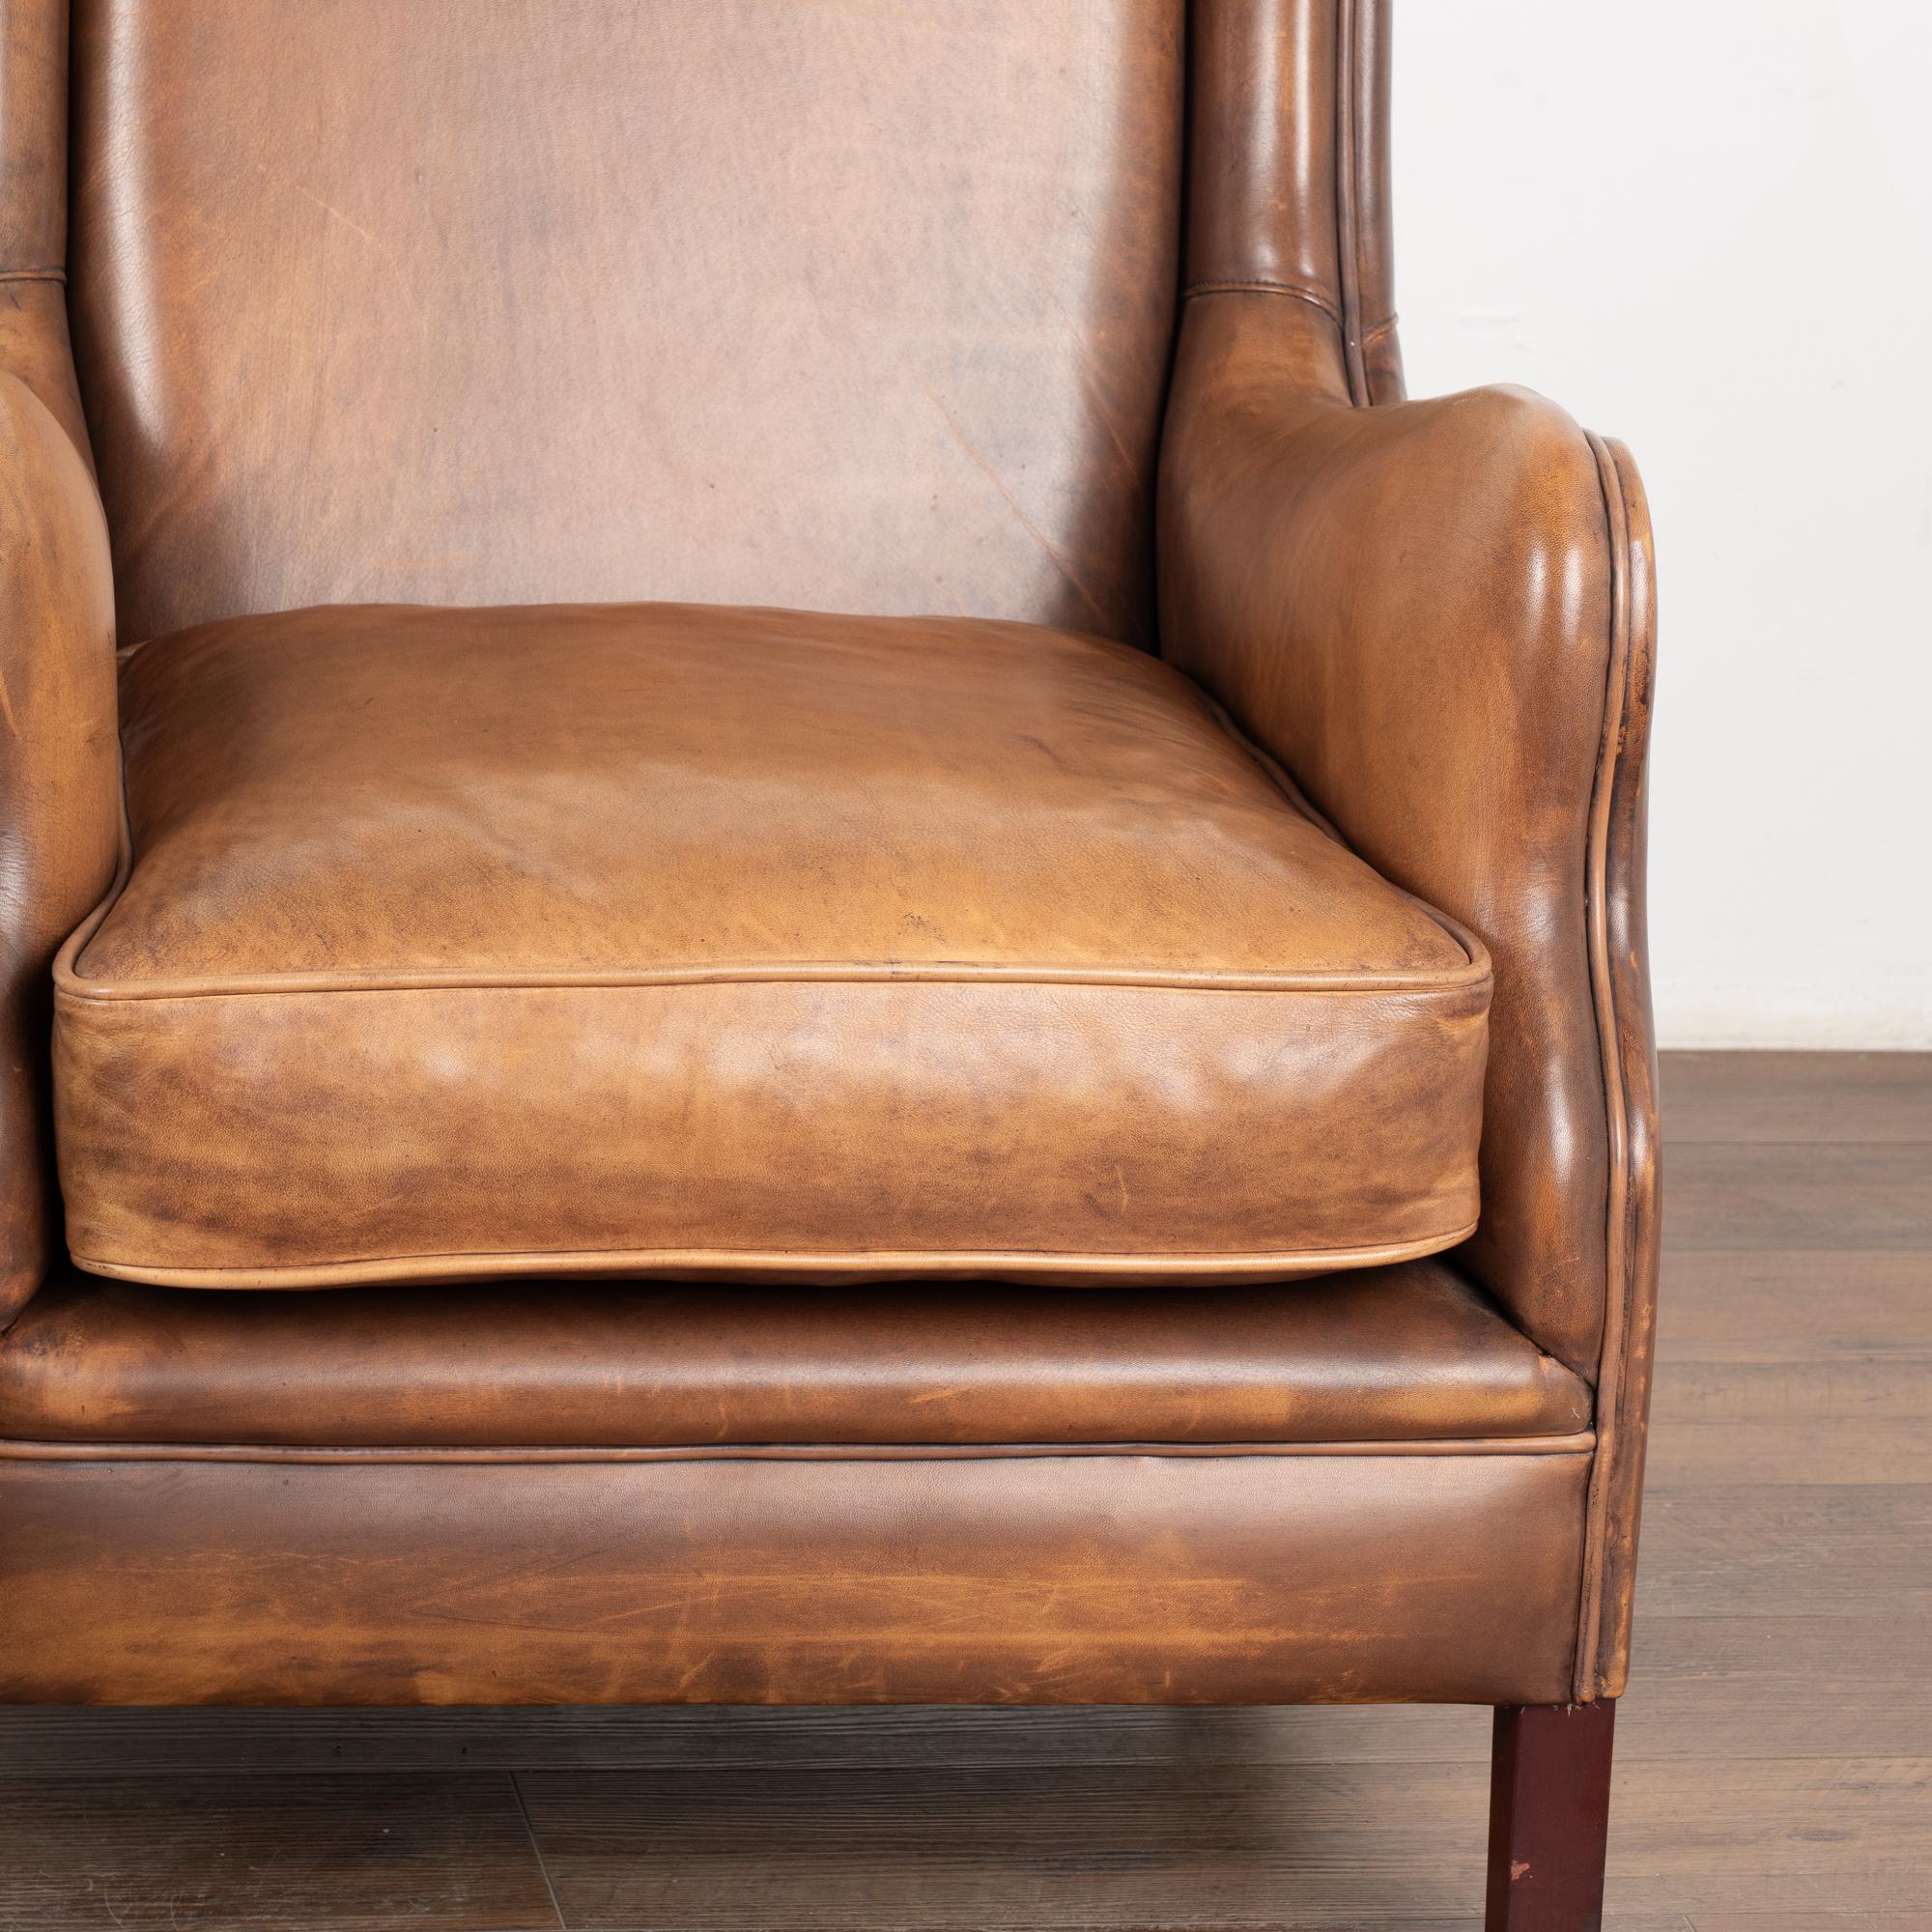 Pair, Vintage Brown Leather Wingback Arm Chairs From France, circa 1920-40 1